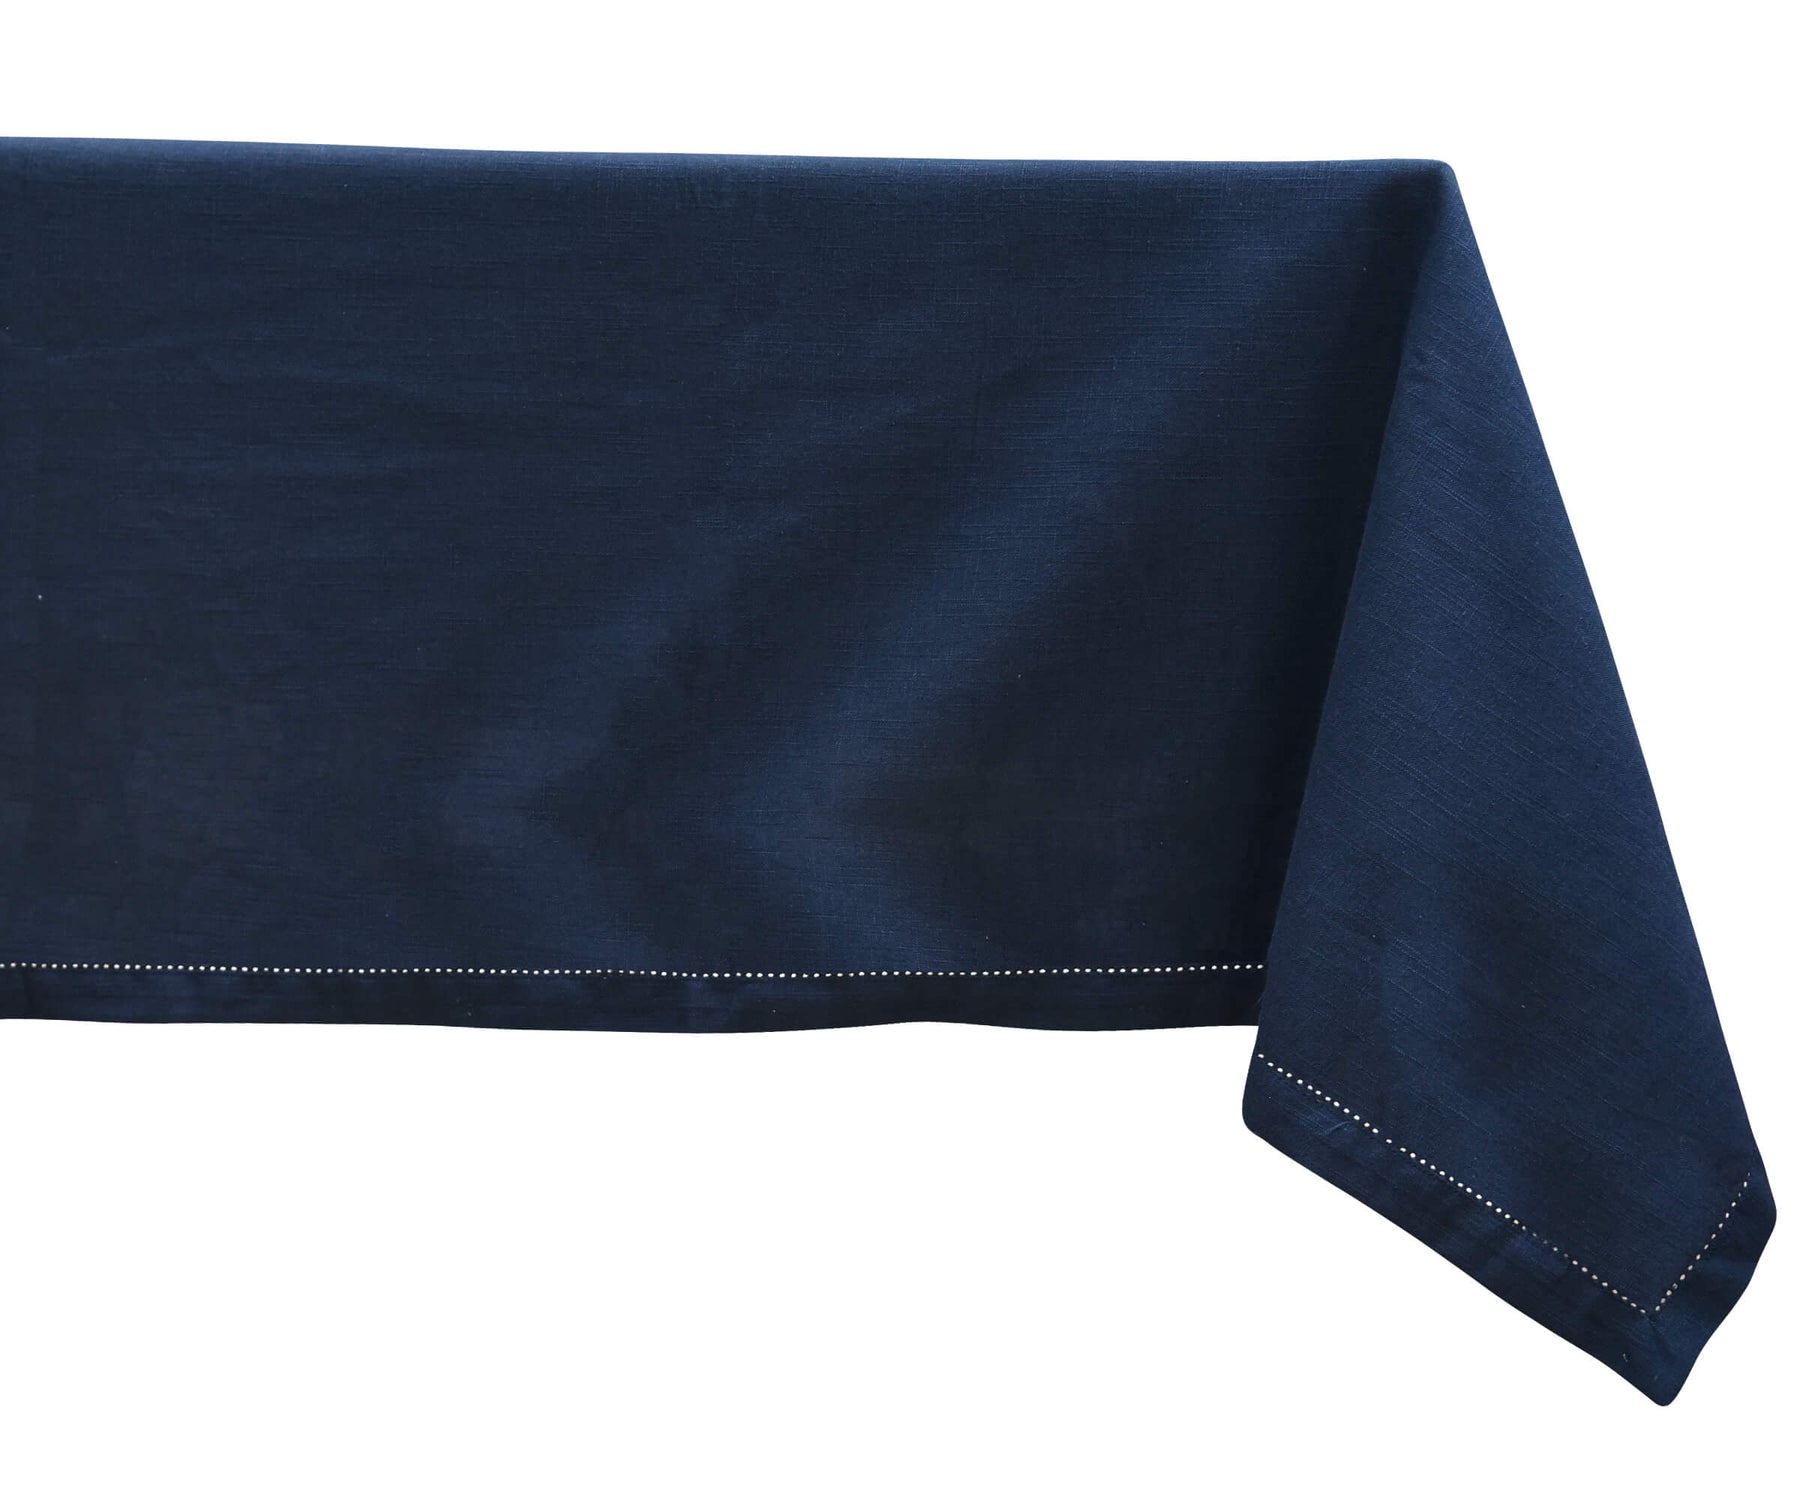 Blue rectangle tablecloth - Cotton Tablecloths is spreaded with white background.